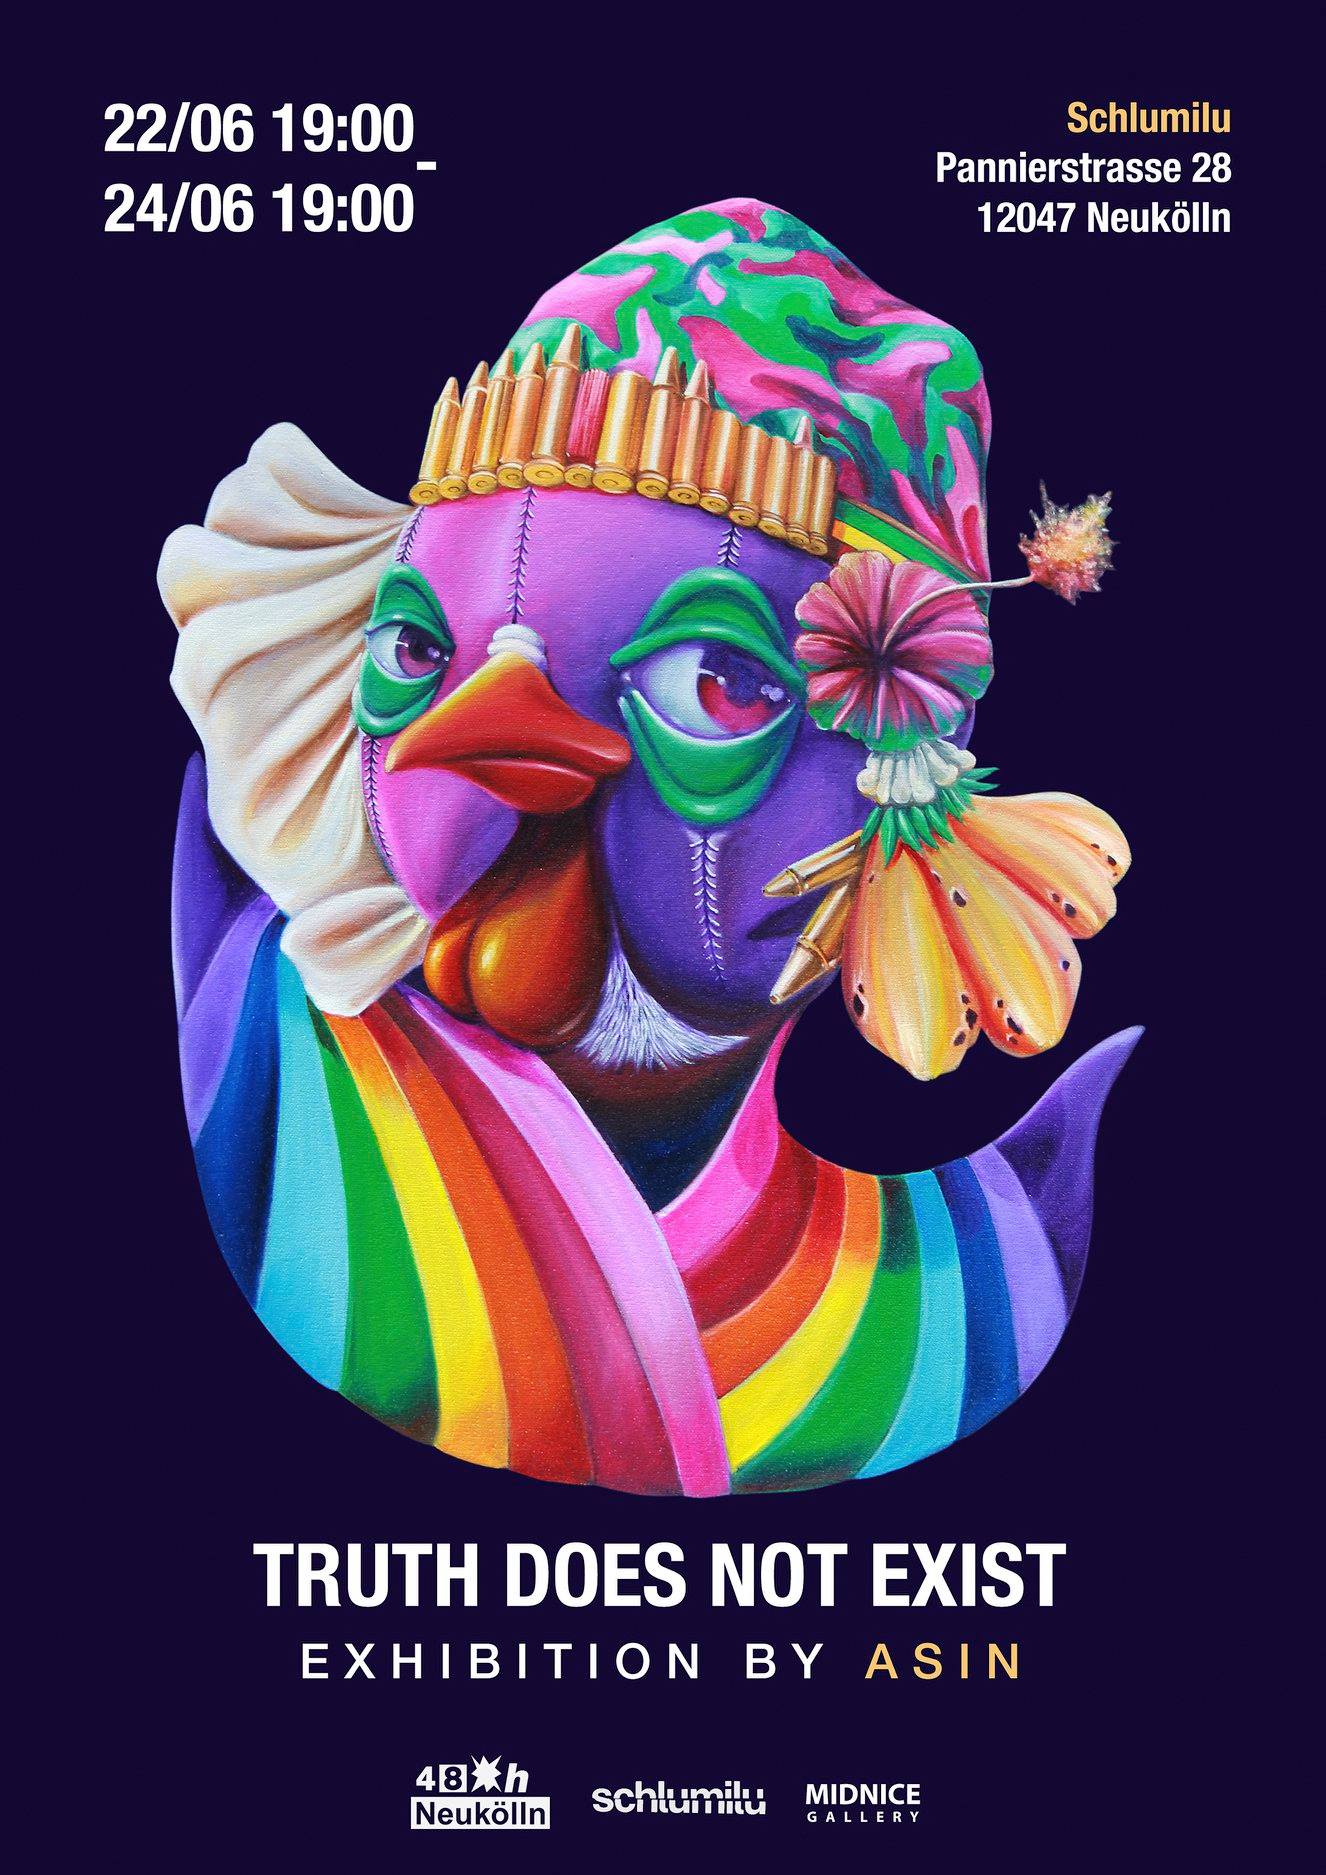 TRUTH DOES NOT EXIST